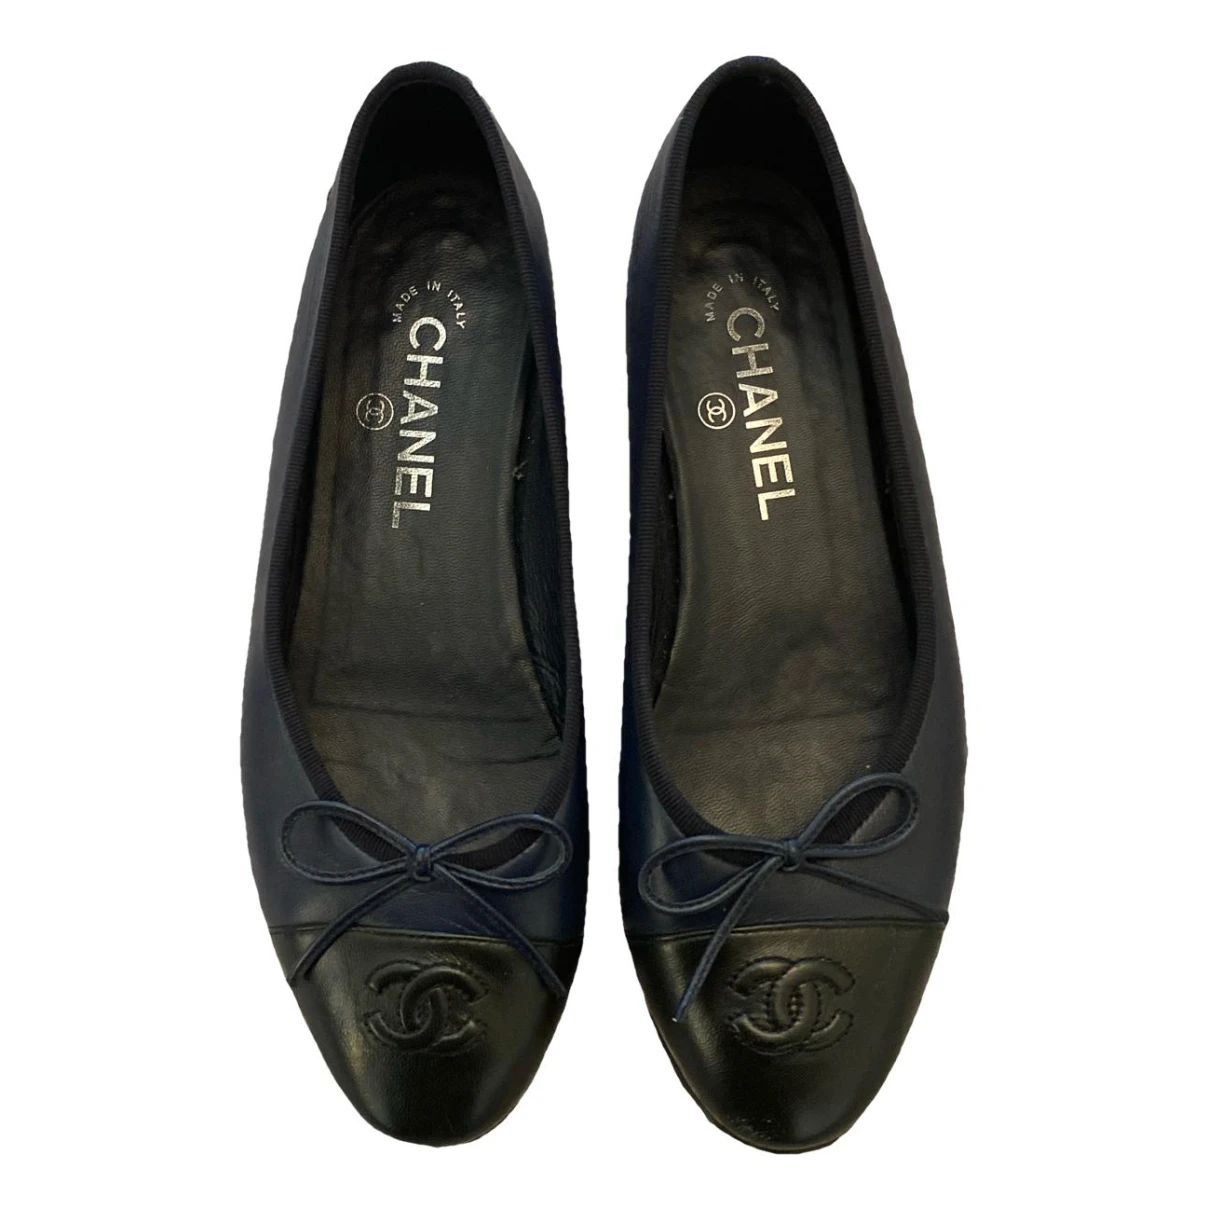 Pre-owned Chanel Leather Ballet Flats In Navy